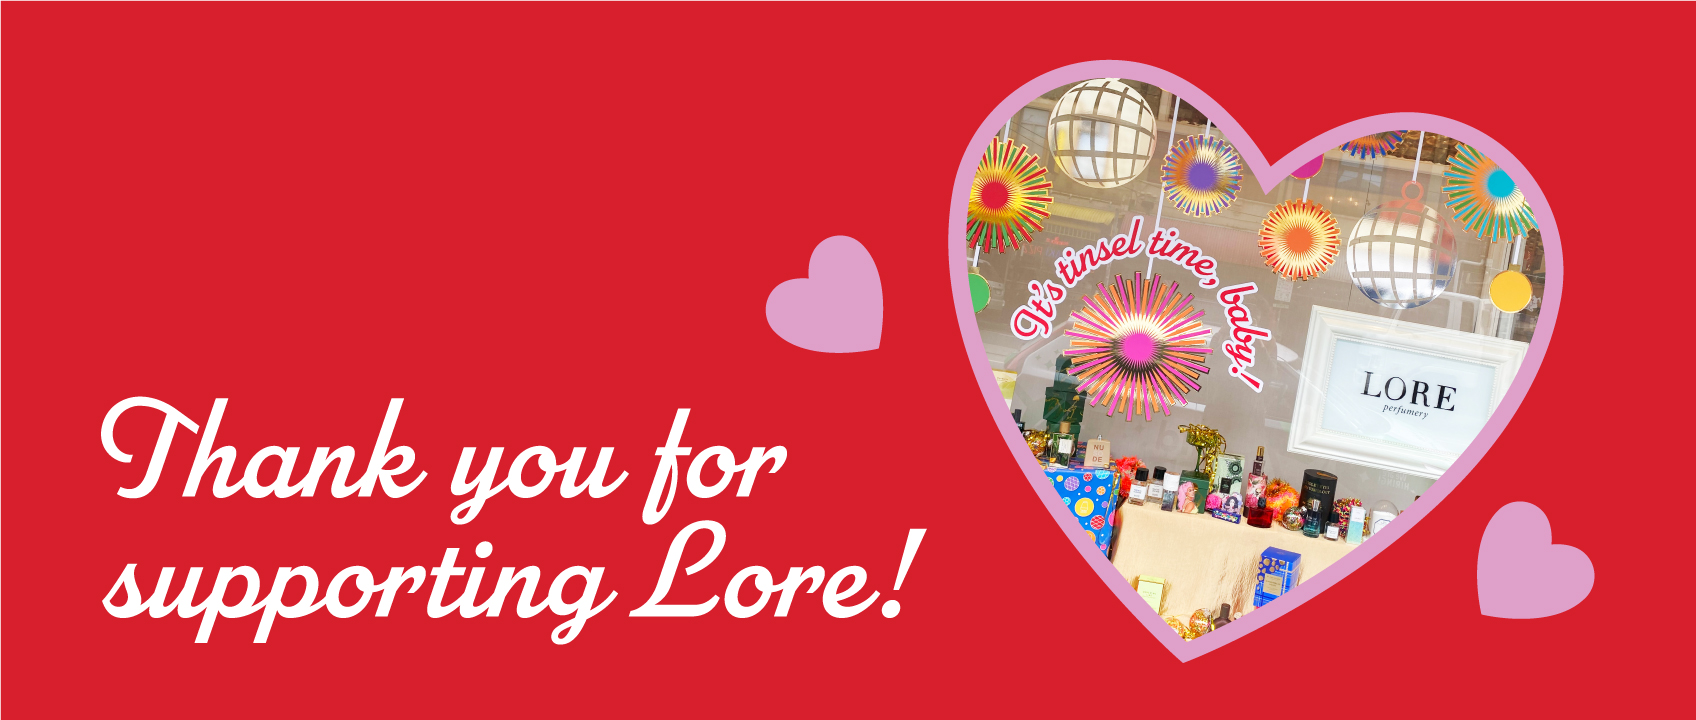 thank you for supporting lore with photo of lore perfumery in a heart frame